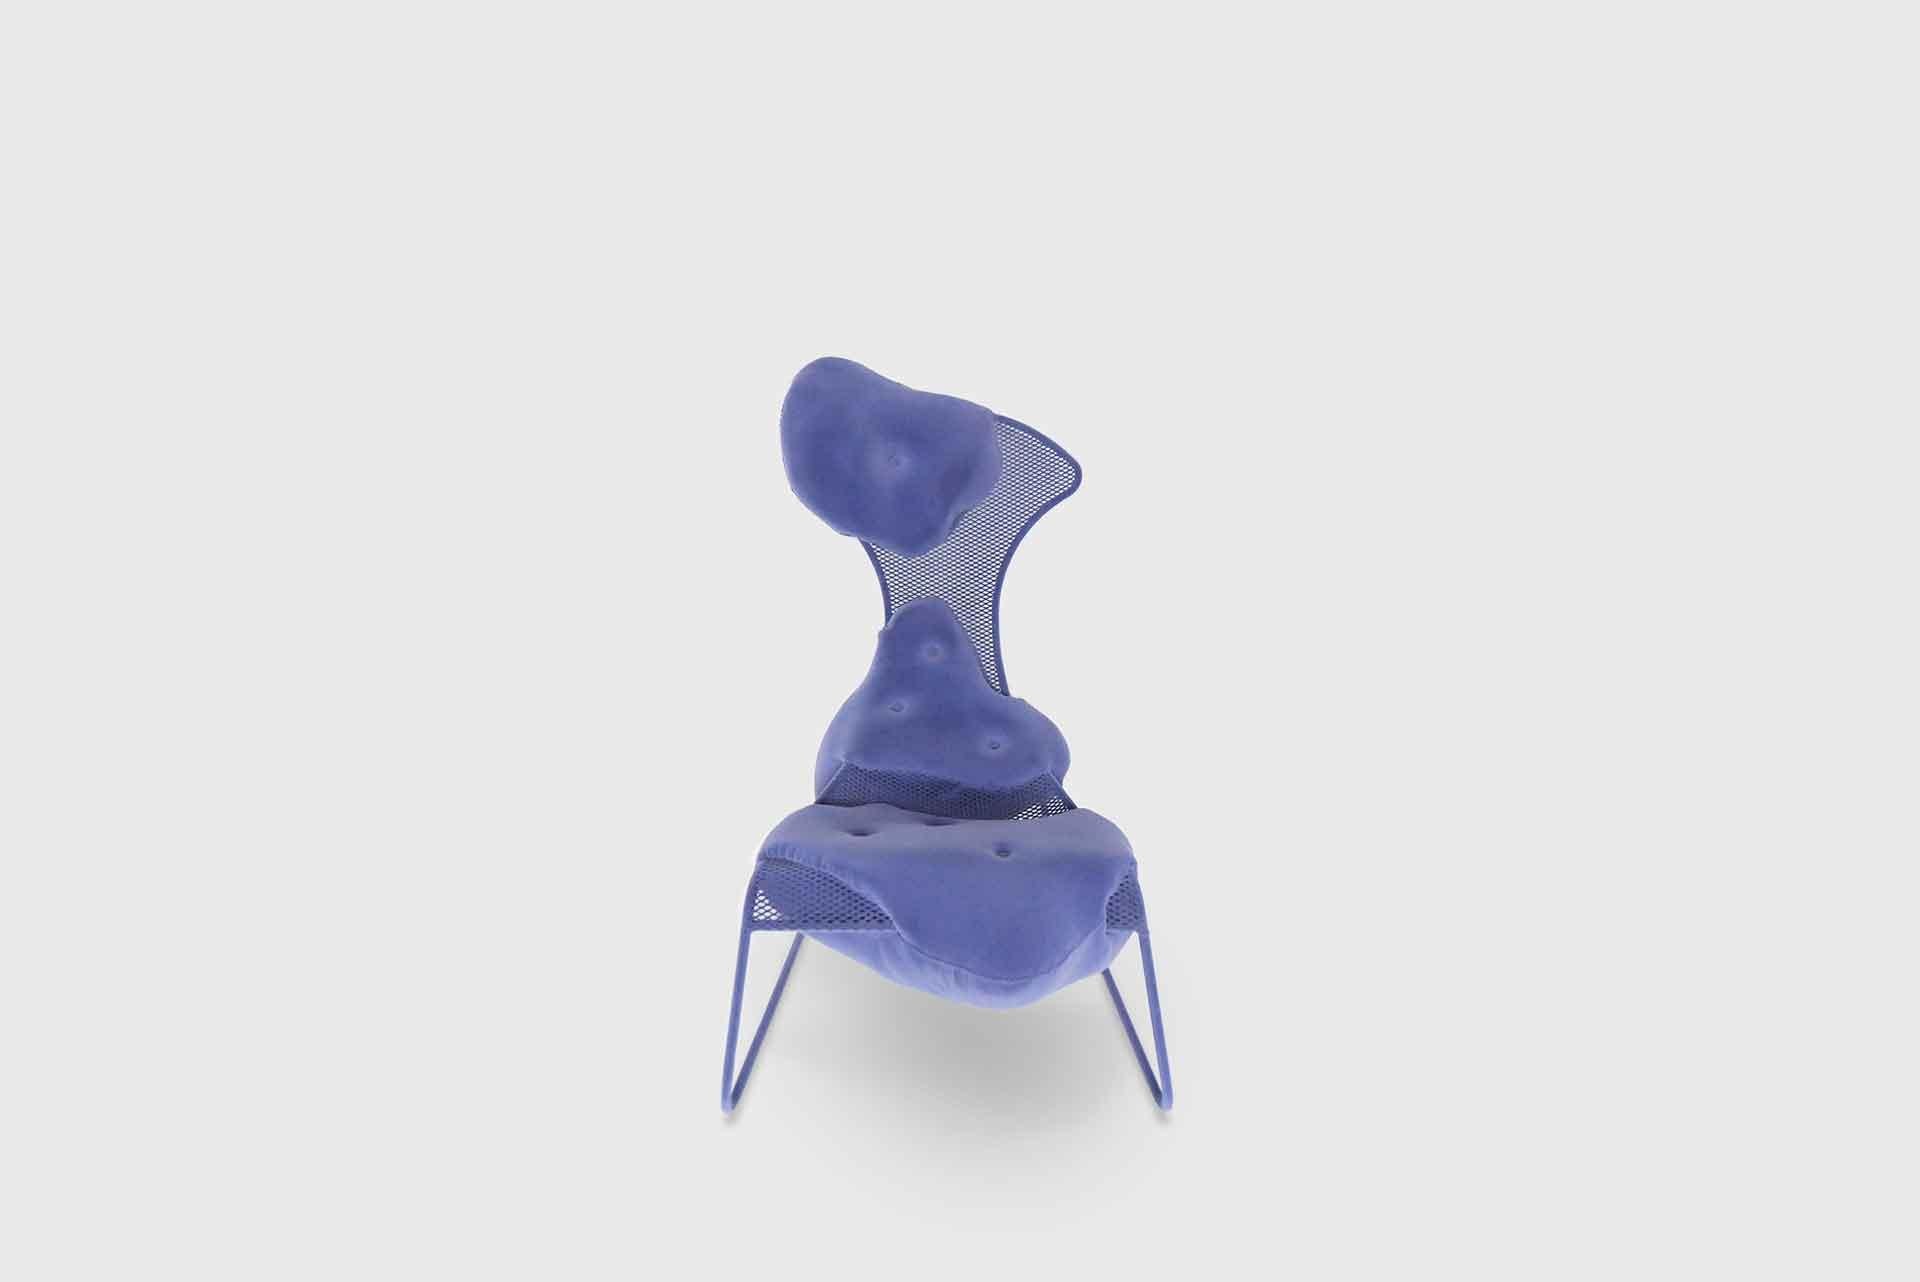 Chair model “Hi!breed”
From “Hi!breed” series 
Manufactured by Charlotte Kingsnorth 
Exclusively for Side Gallery
UK, 2022 
Old metal tubular and mesh Ikea chair frame, enveloped sculpted foam, flock finish

The Hi!breed collection explores